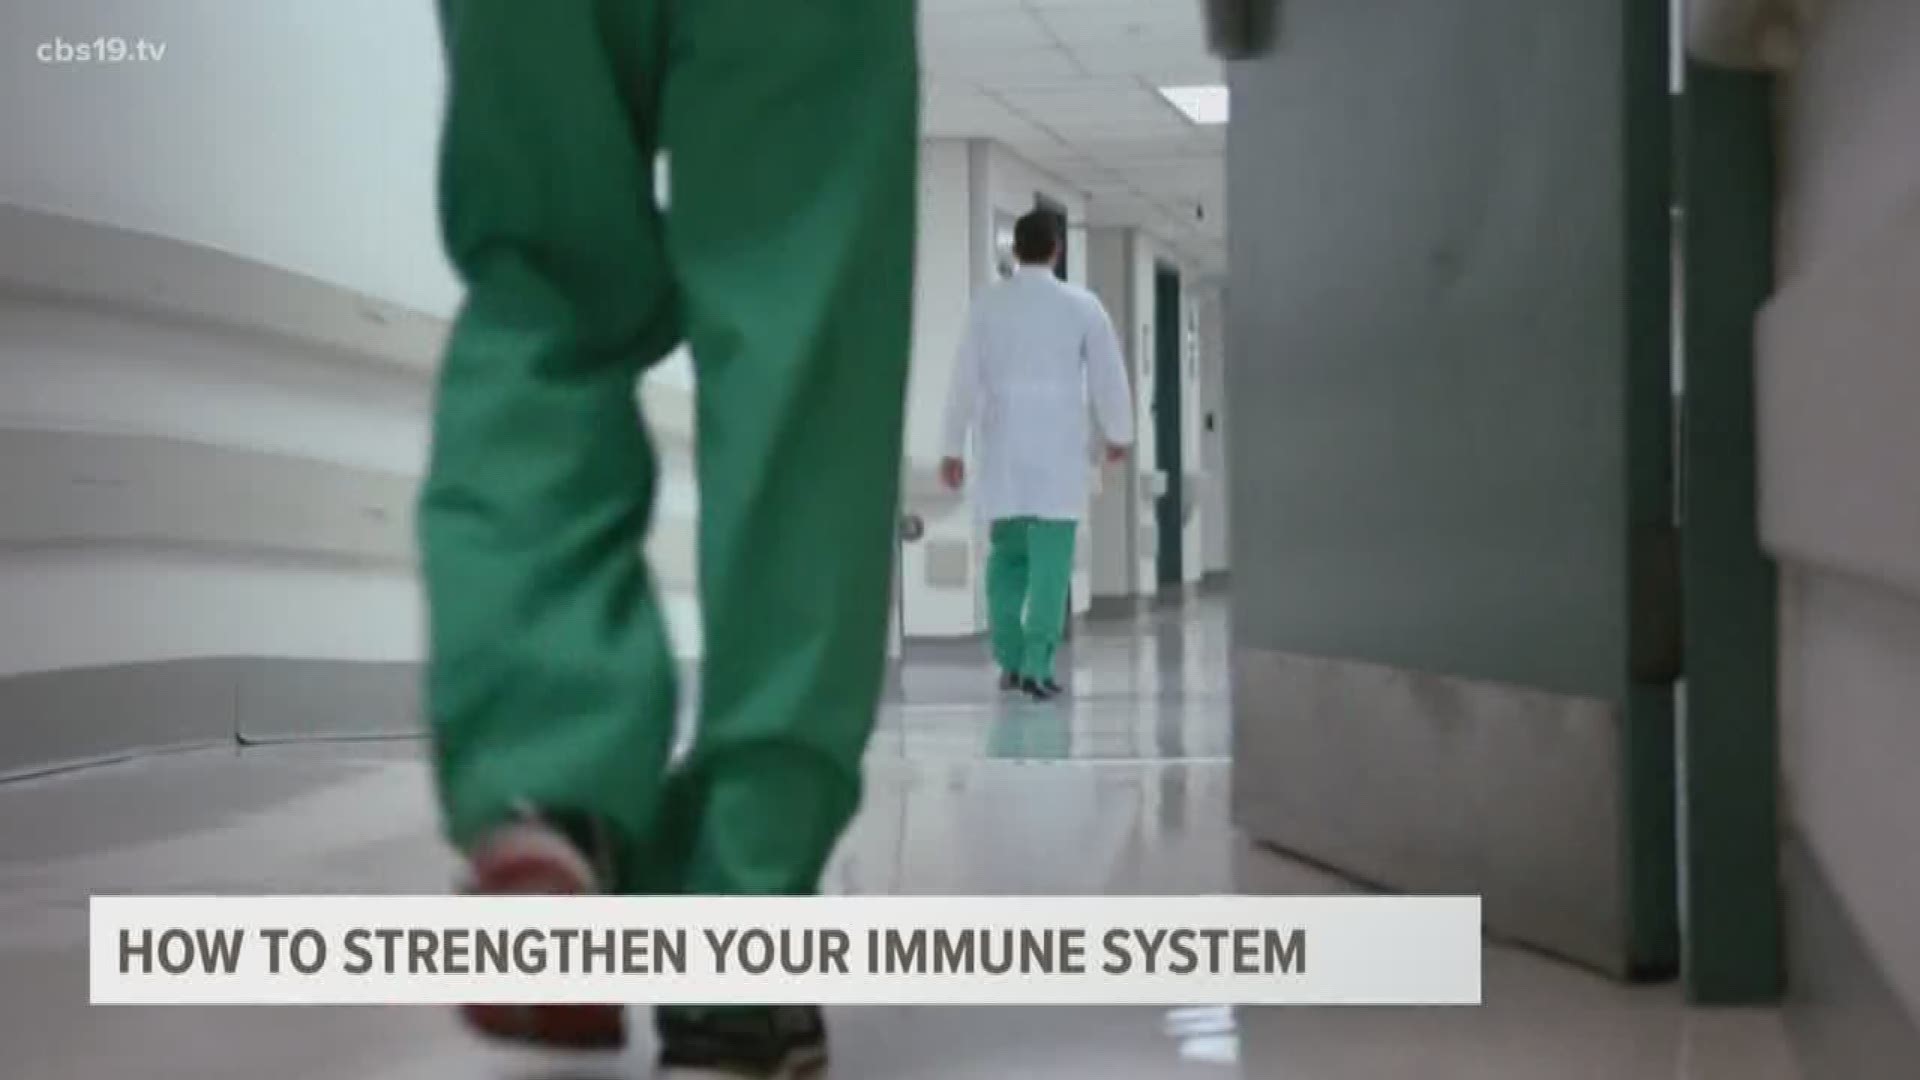 TIPS: How to strengthen your immune system